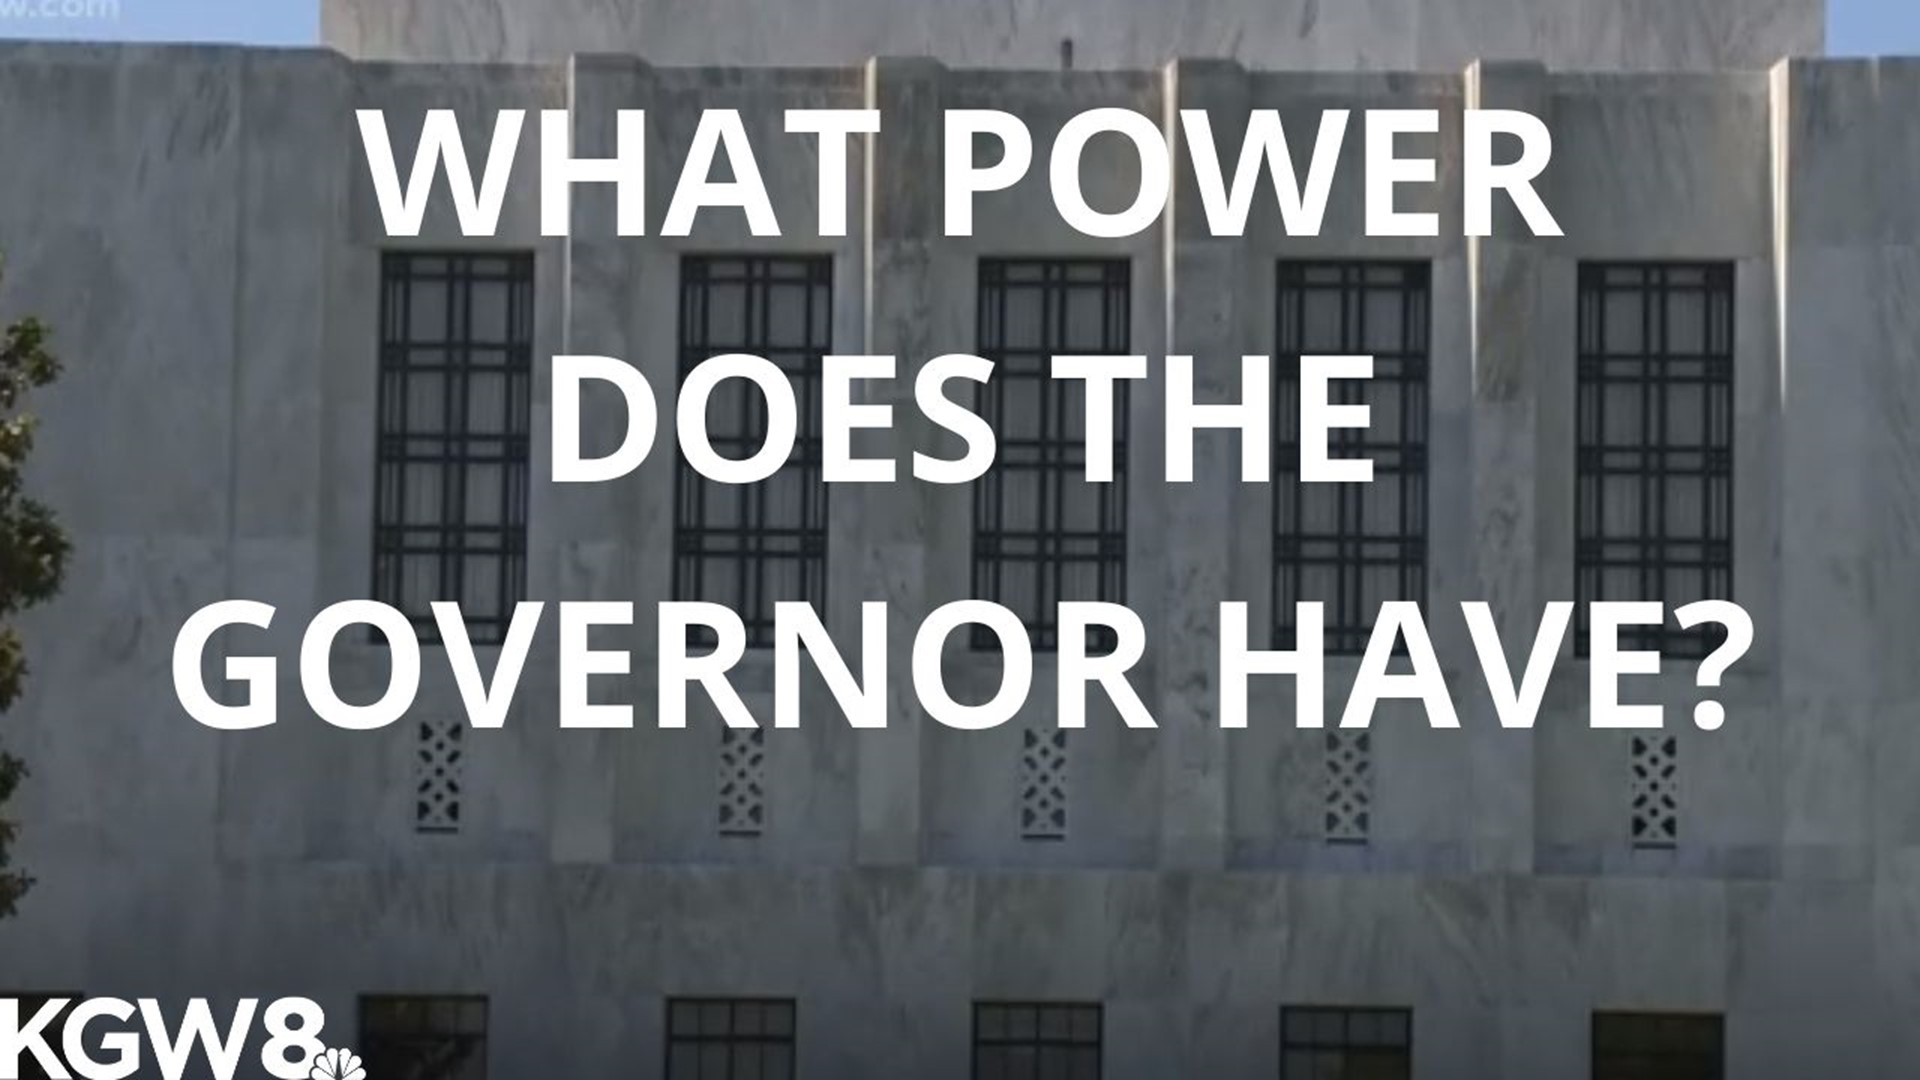 There seems to be a lot of confusion over the governor’s authority right now. Let’s take a look.